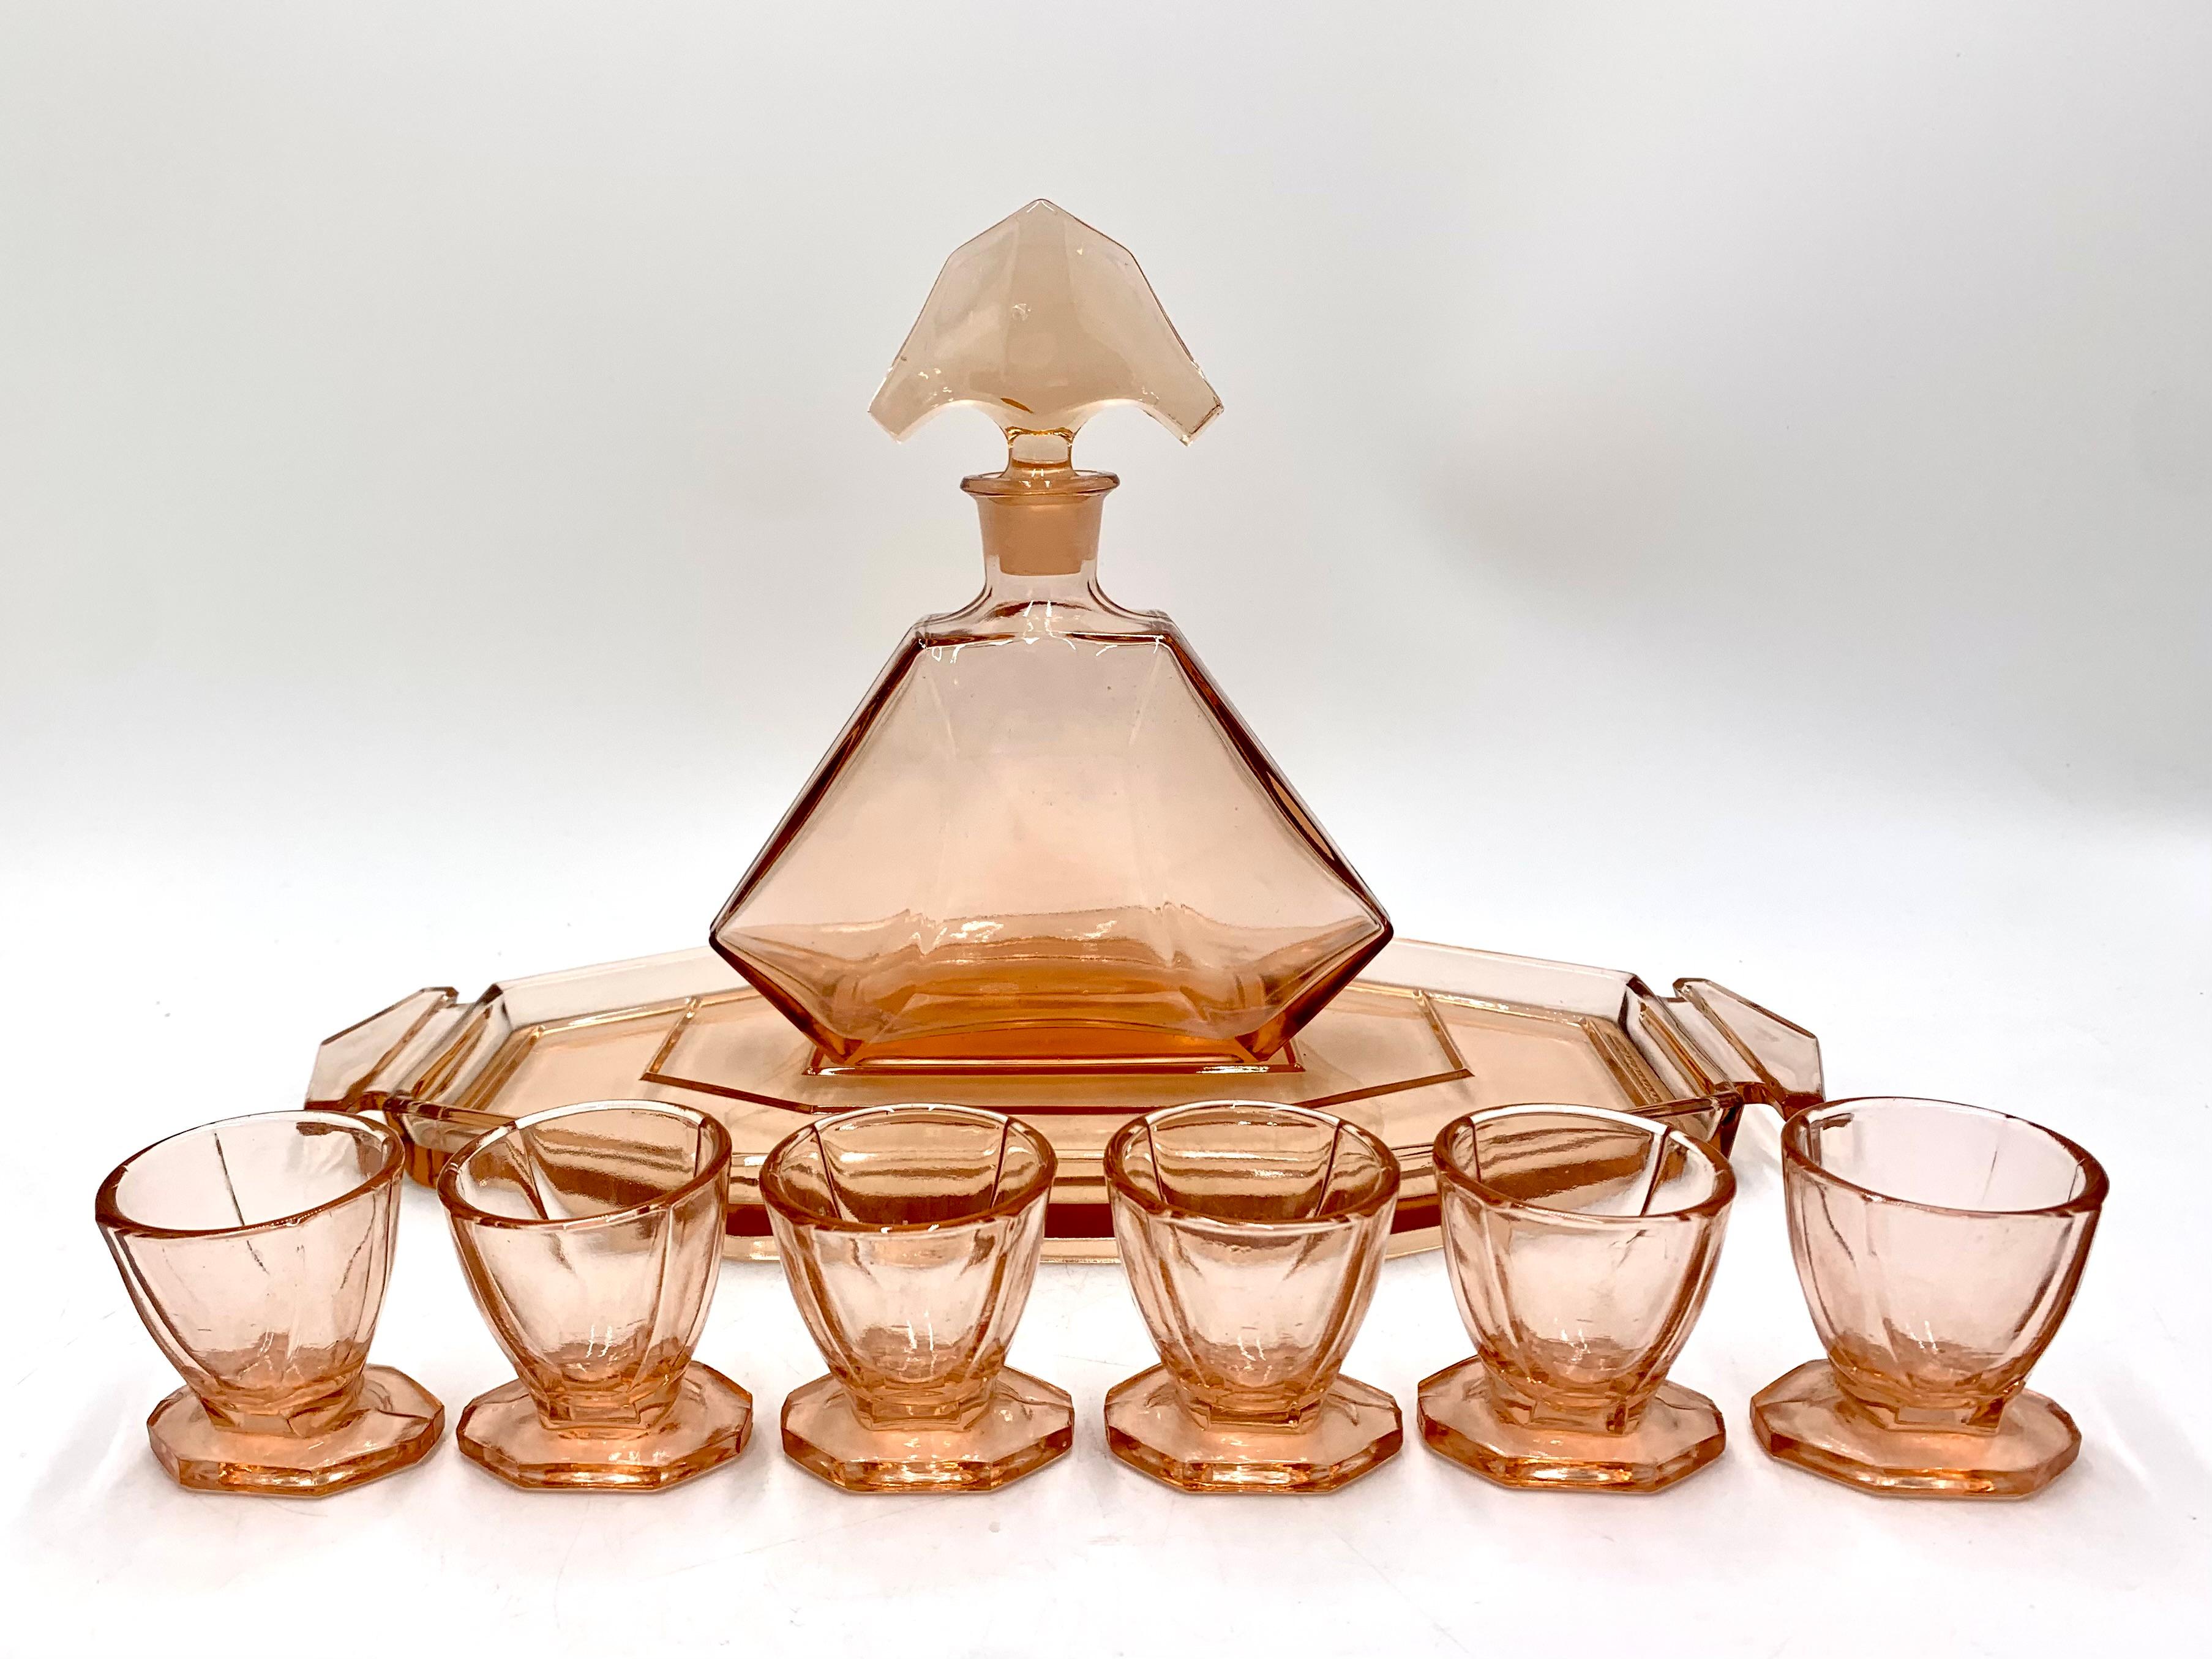 Pink Art Deco glass liqueur set consisting of a tray, a decanter and 6 glasses.

Produced in the Czech Republic by Huta Hermanova in the 1930s.

Very good condition, no damage.

tray: height 3cm, width 35cm, depth 16cm

carafe: height 19cm, width